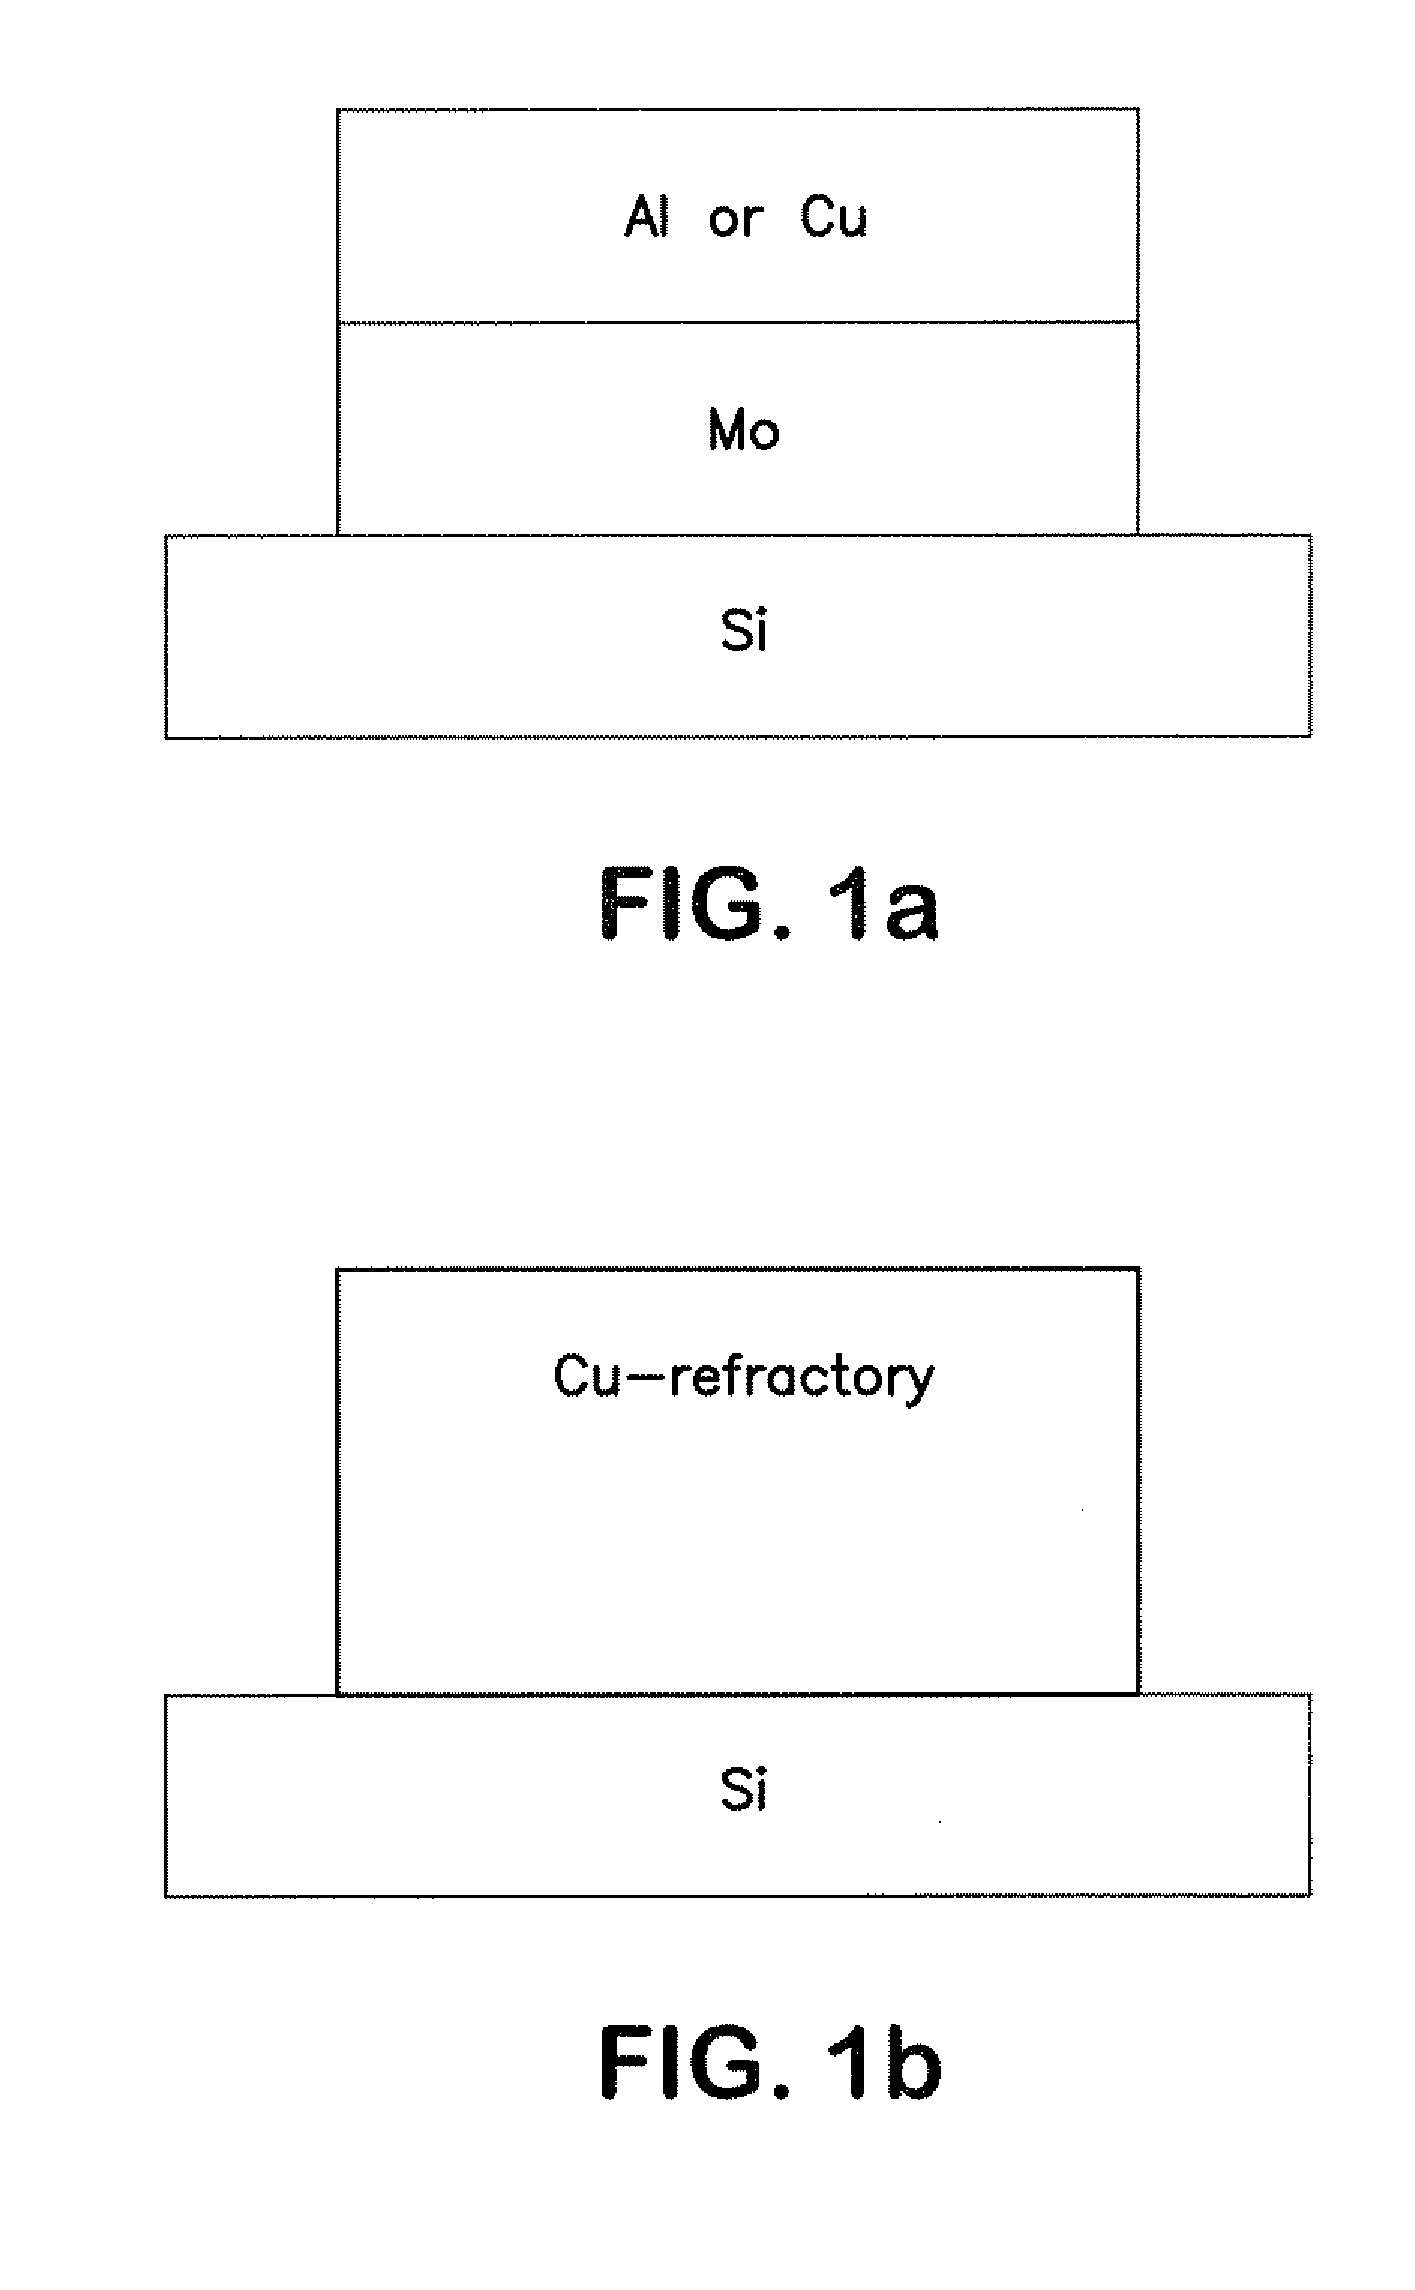 Refractory metal-doped sputtering targets, thin films prepared therewith and electronic device elements containing such films